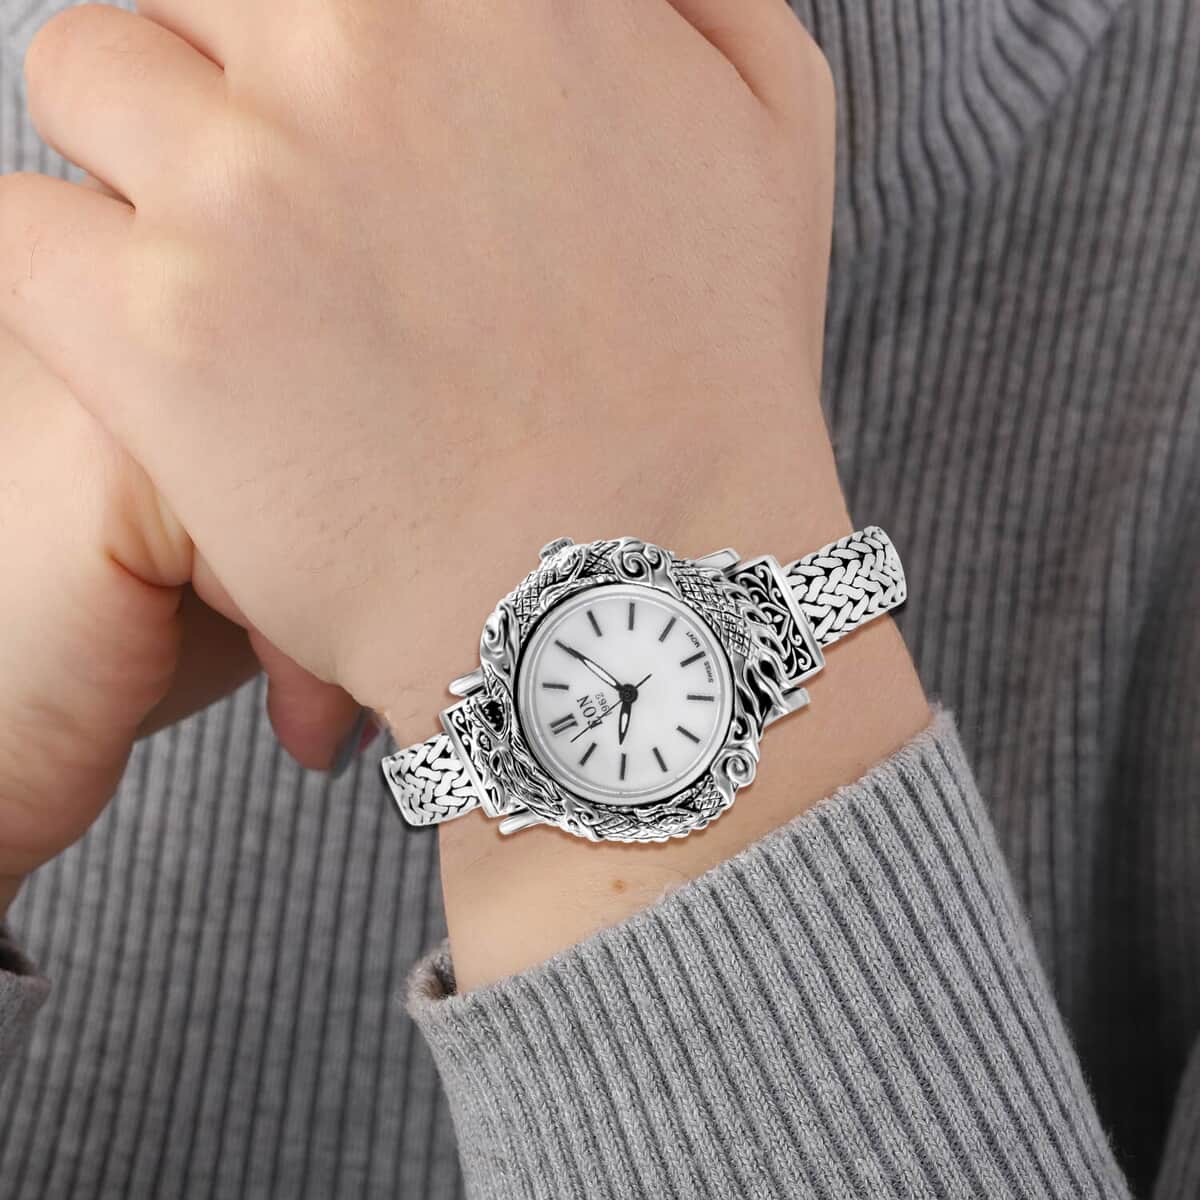 Bali Legacy Eon 1962 Swiss Movement MOP Dial Dragon Case Bracelet Watch in Sterling Silver (8.00 in), Vintage Casual Bracelet Watch, Best Everyday Luxury Minimal Women's Watch, Analogue Watches image number 2